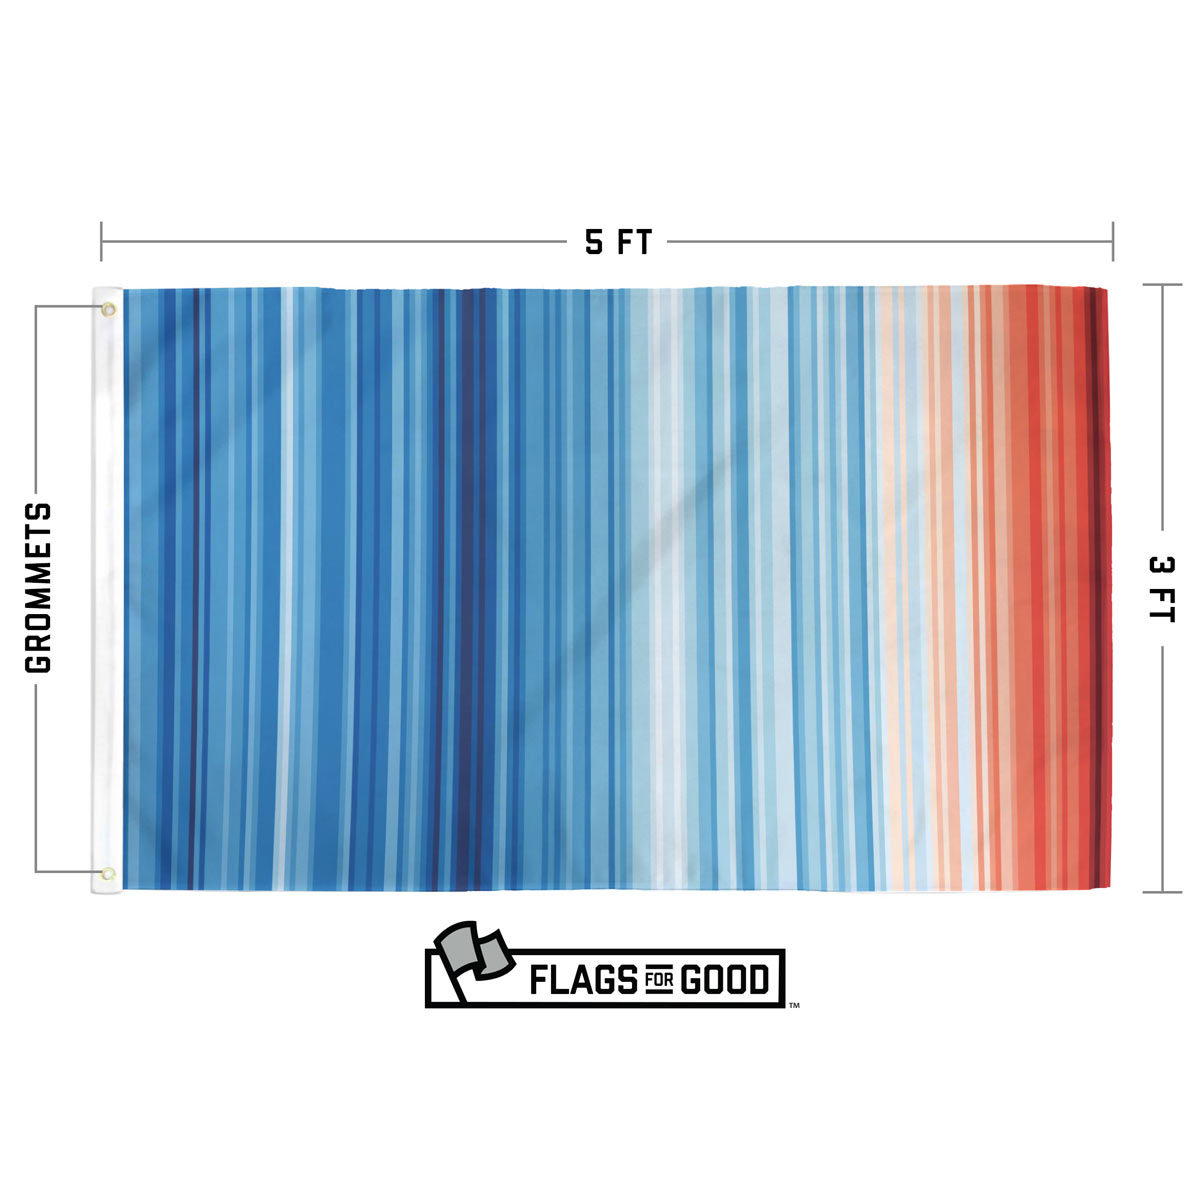 Climate warming stripes flag measuring 3 by 5 feet